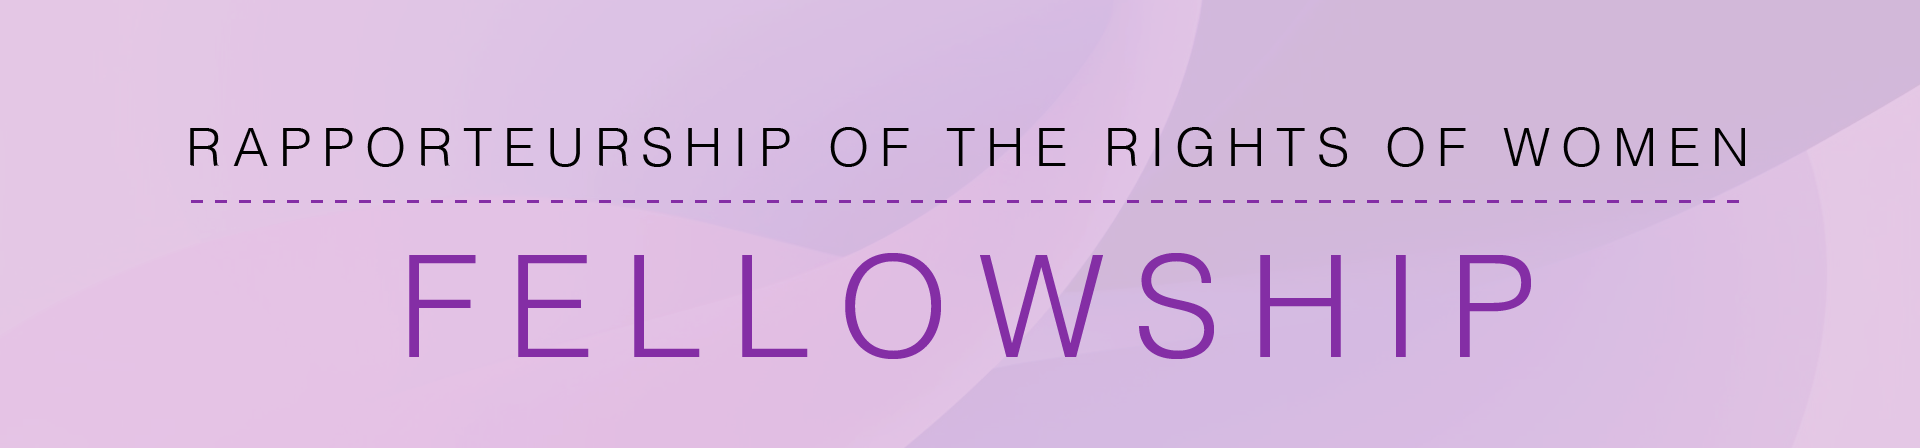 Call for applications for fellowship on the Rapporteurship on the Rights of Women